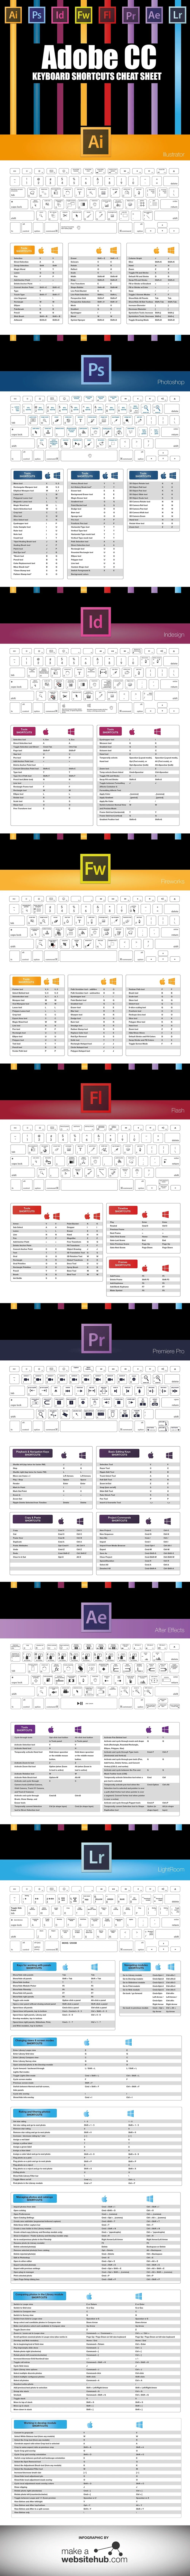 The Ultimate Adobe Creative Cloud Keyboard Shortcuts Cheat Sheet - #infographic